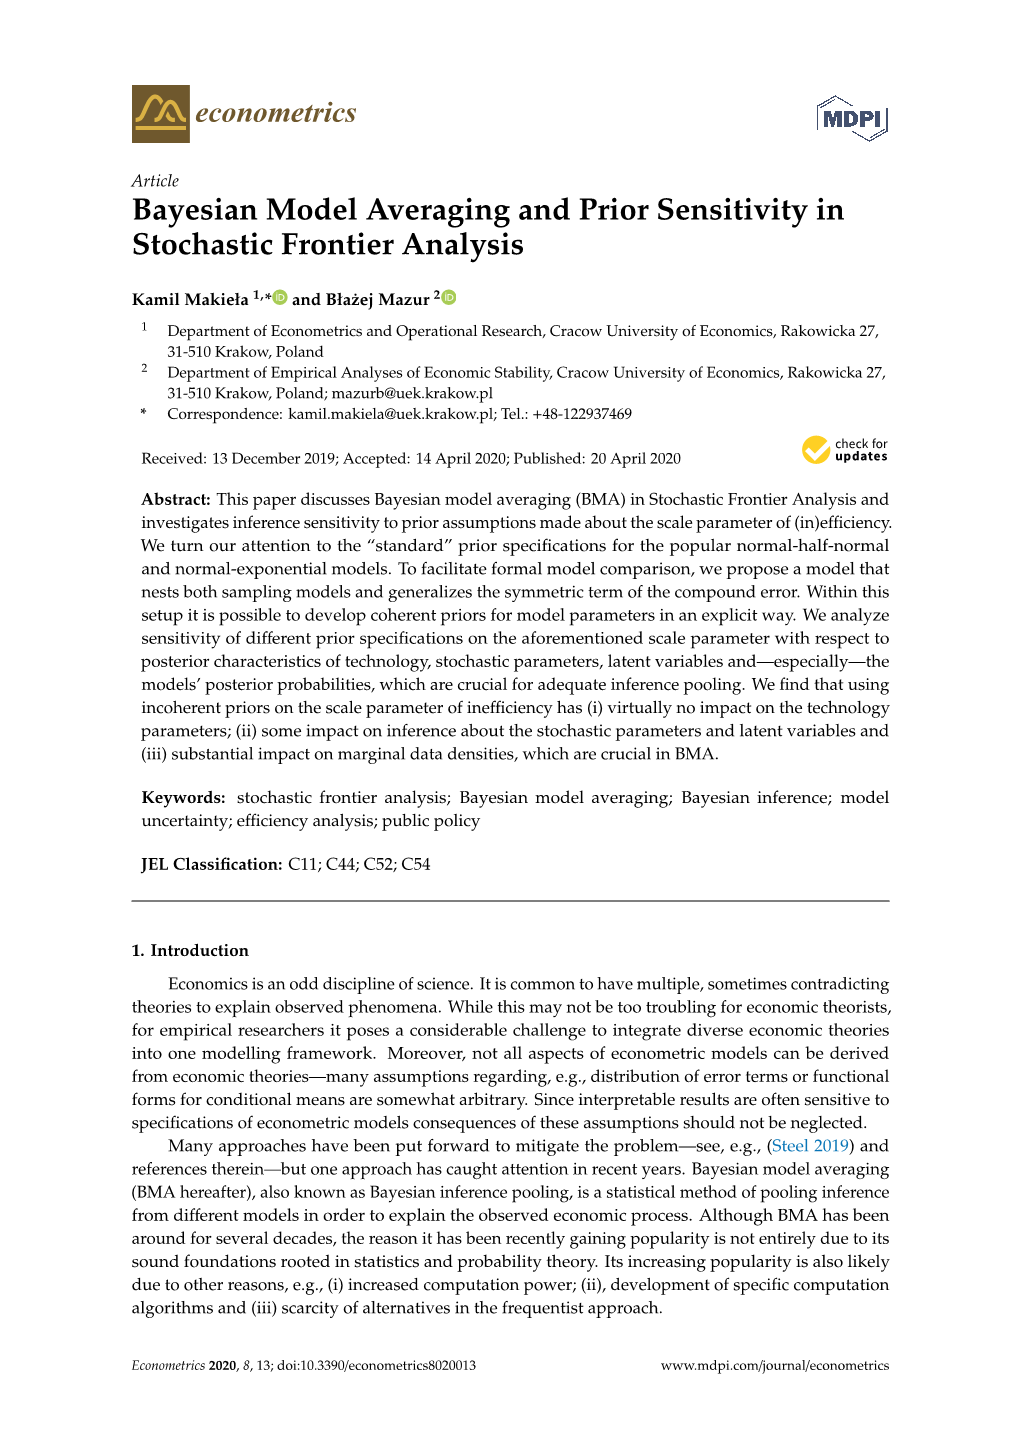 Bayesian Model Averaging and Prior Sensitivity in Stochastic Frontier Analysis